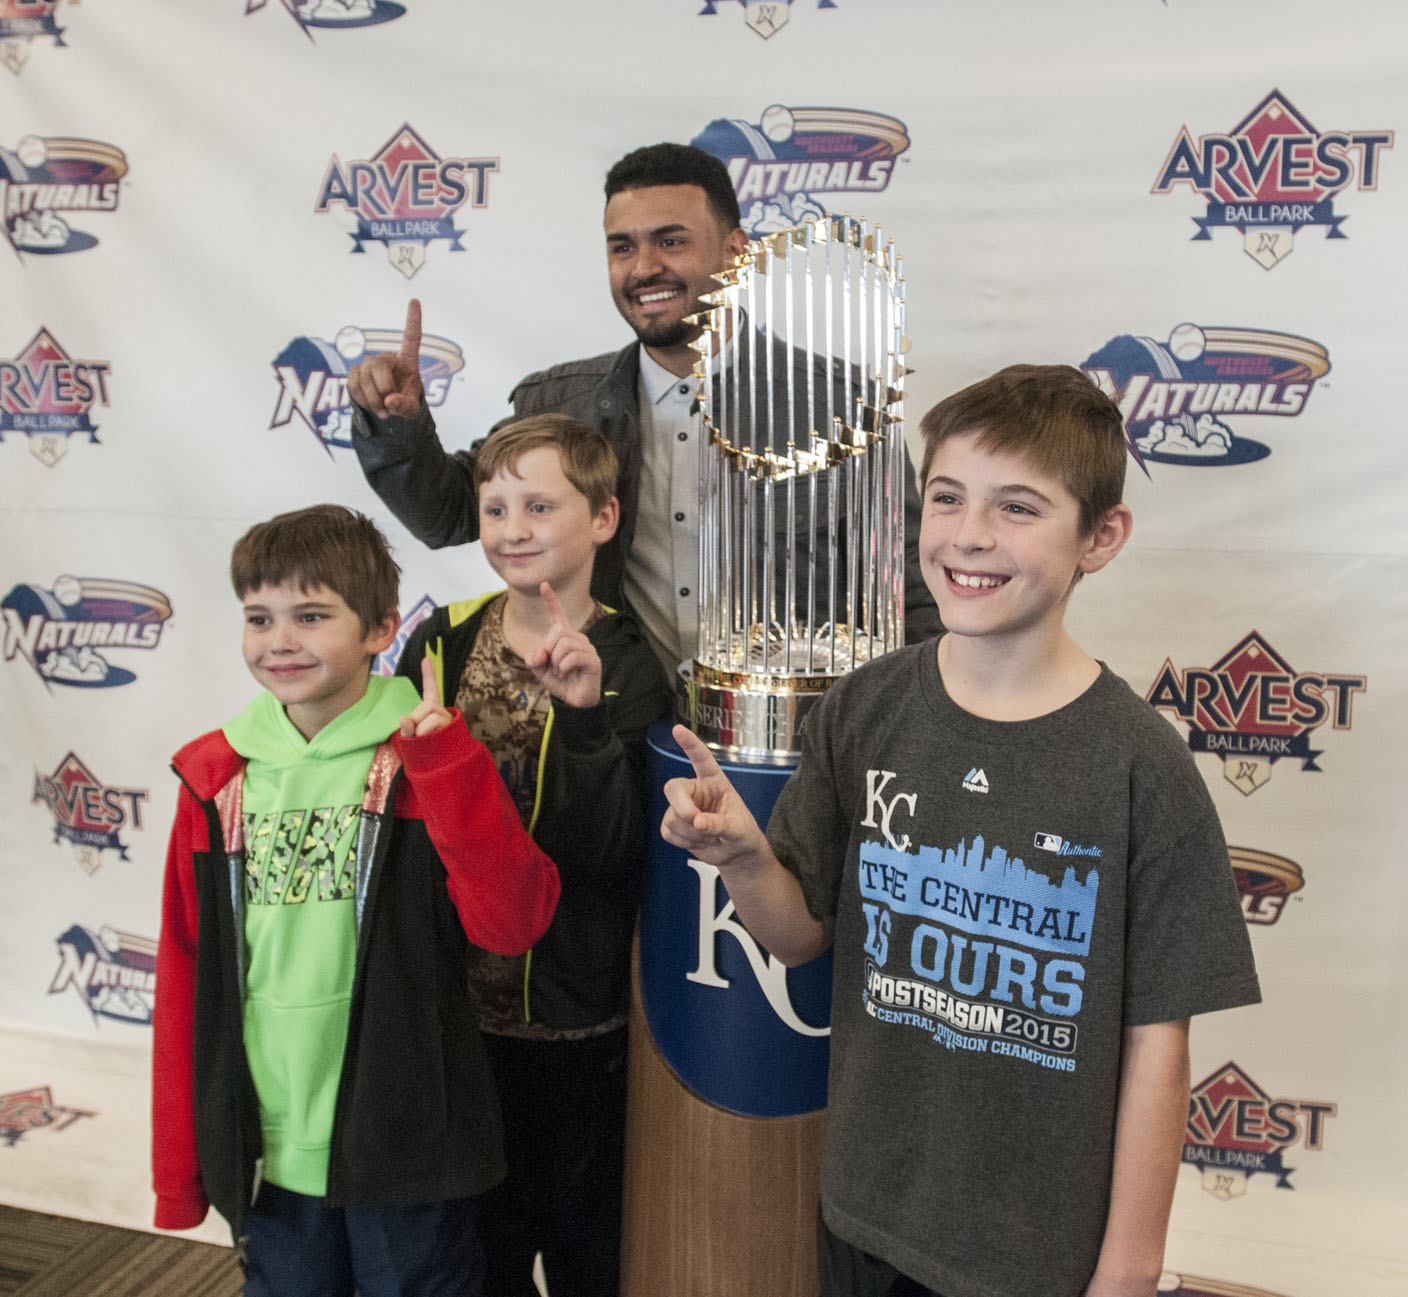 Royals fans bask in the glow of the World Series trophy